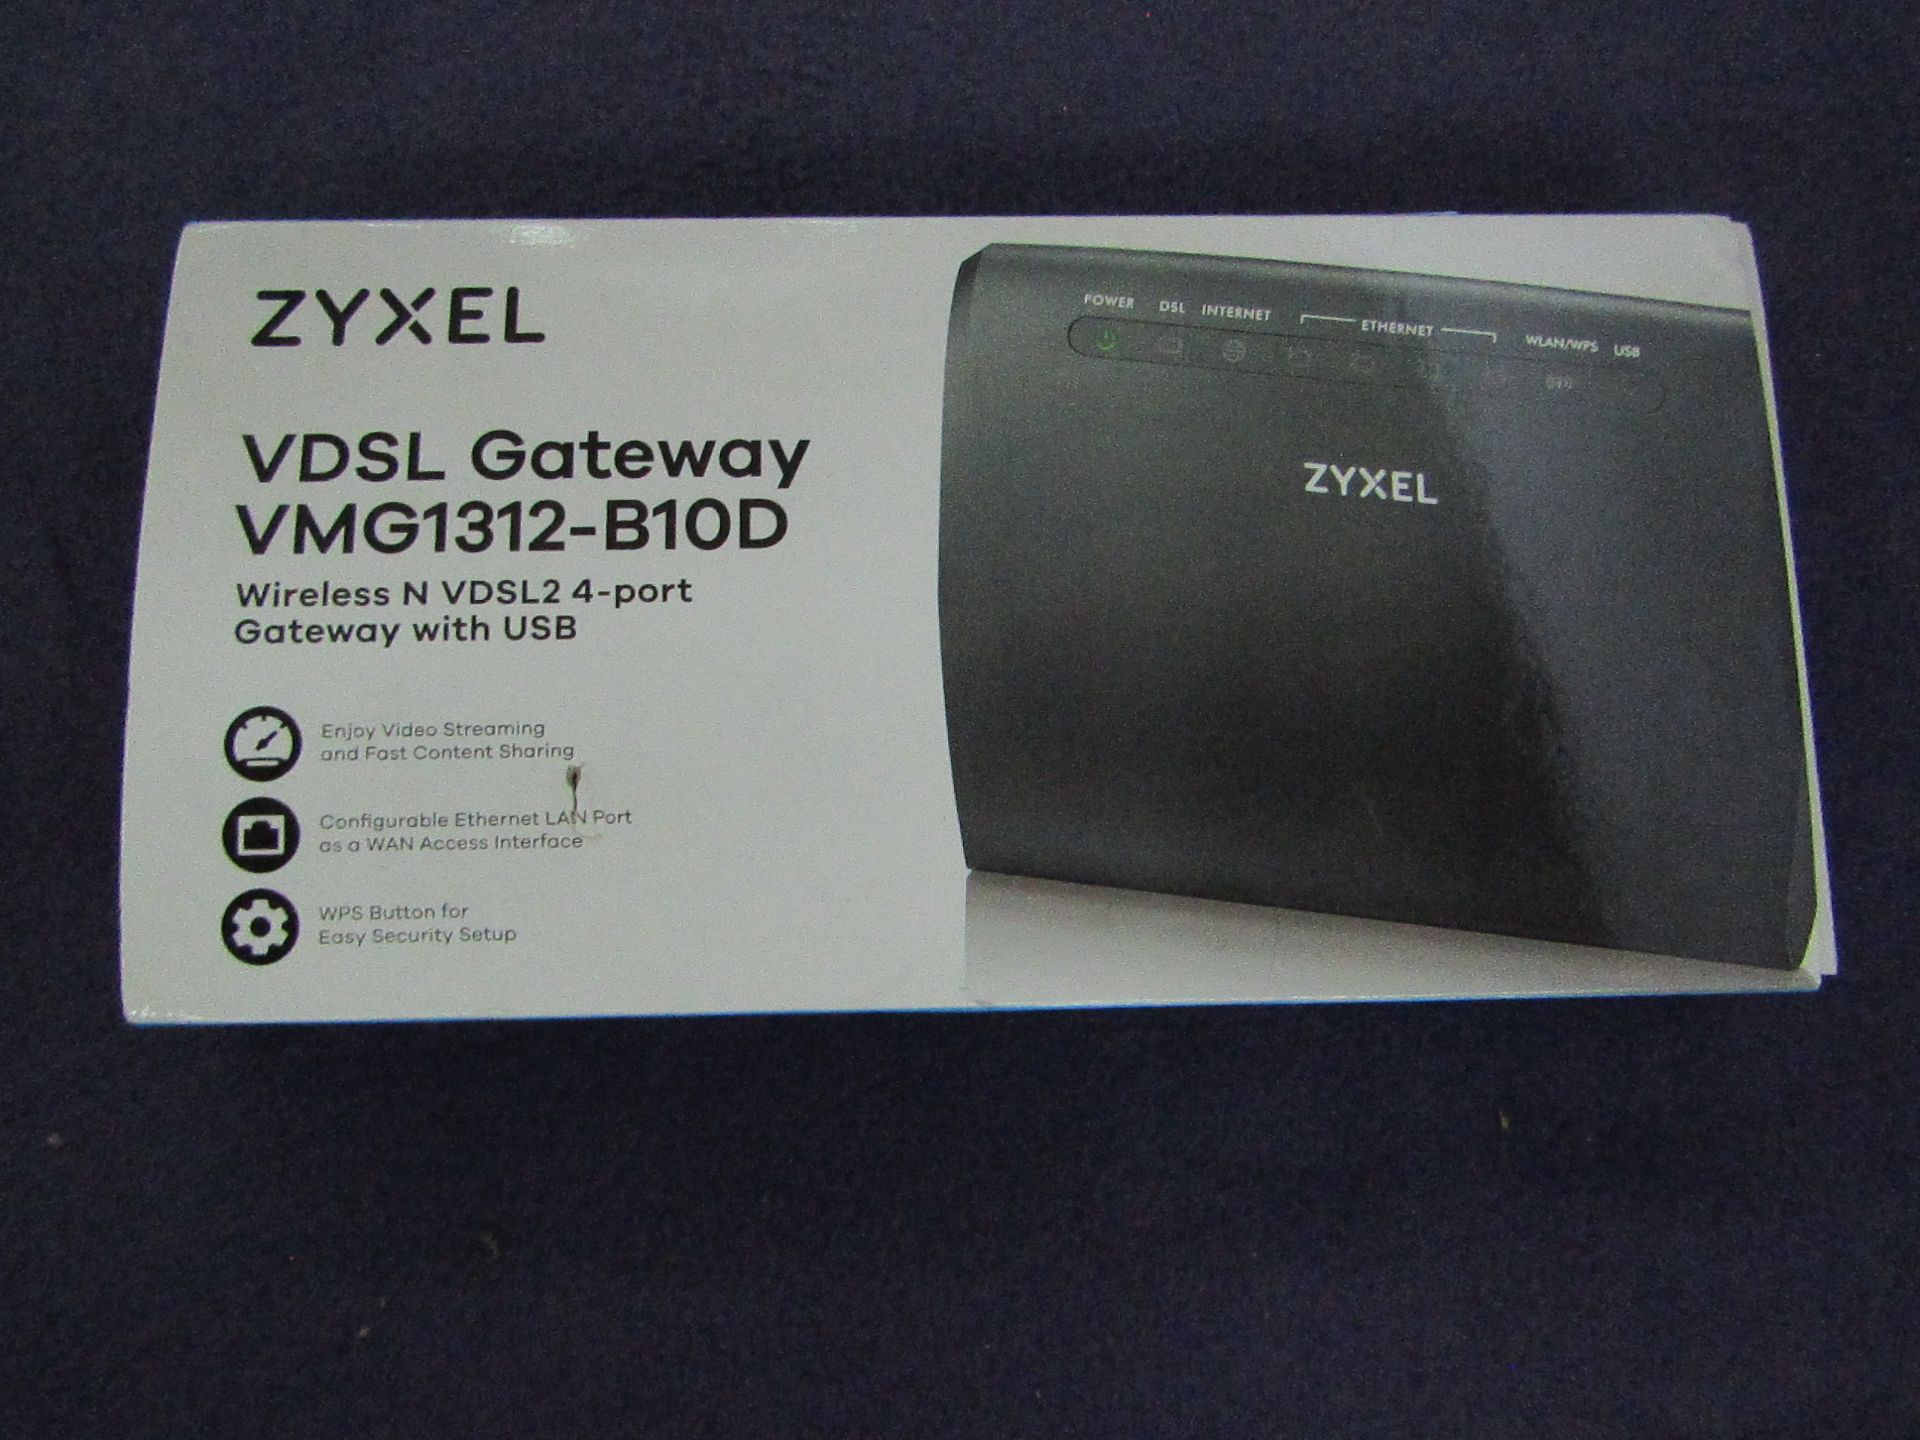 Zyxel - VDSL 4-Port Gateway With USB - VMG1312-B10D - Unchecked & Boxed.